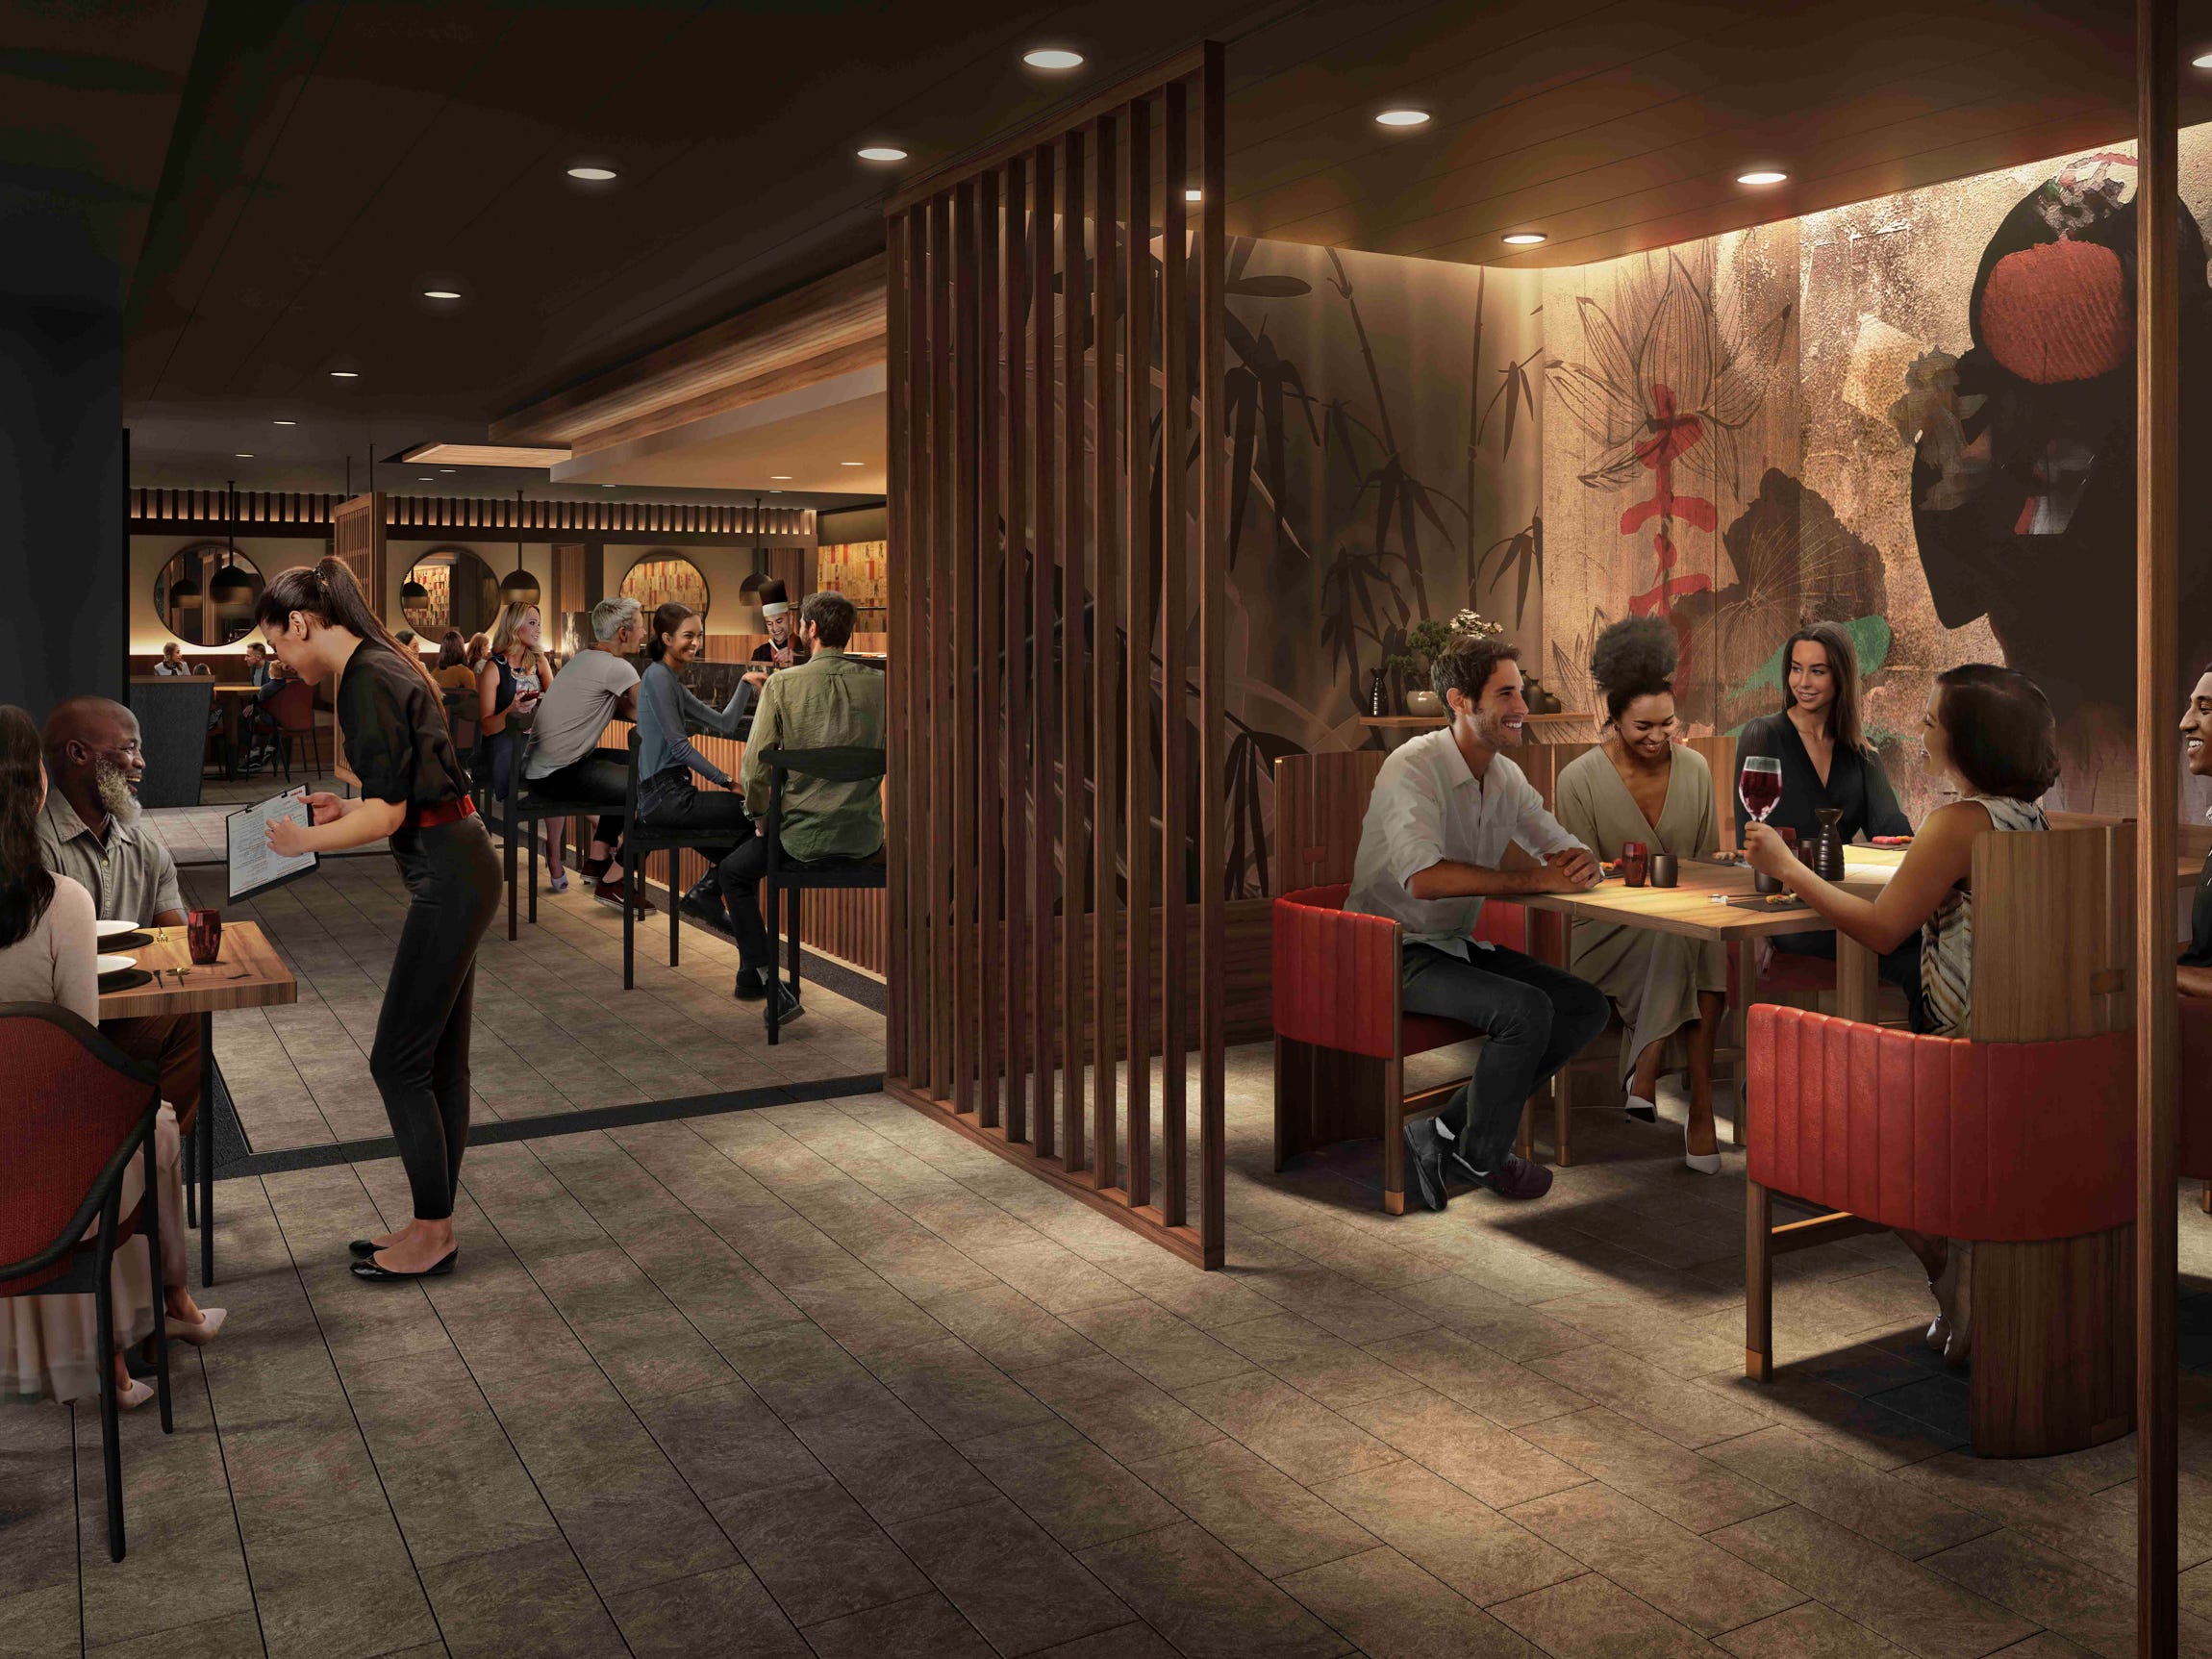 <p>But the one on Utopia will debut an additional "omakase-inspired" menu, according to the cruise operator.</p><p>Travelers on the go can instead indulge in takeout sushi at Izumi’s grab-and-go window, a concept first introduced on <a href="https://www.businessinsider.com/photos-royal-caribbean-new-icon-of-the-seas-cruise-ship-2022-10">Icon of the Seas</a>. </p>